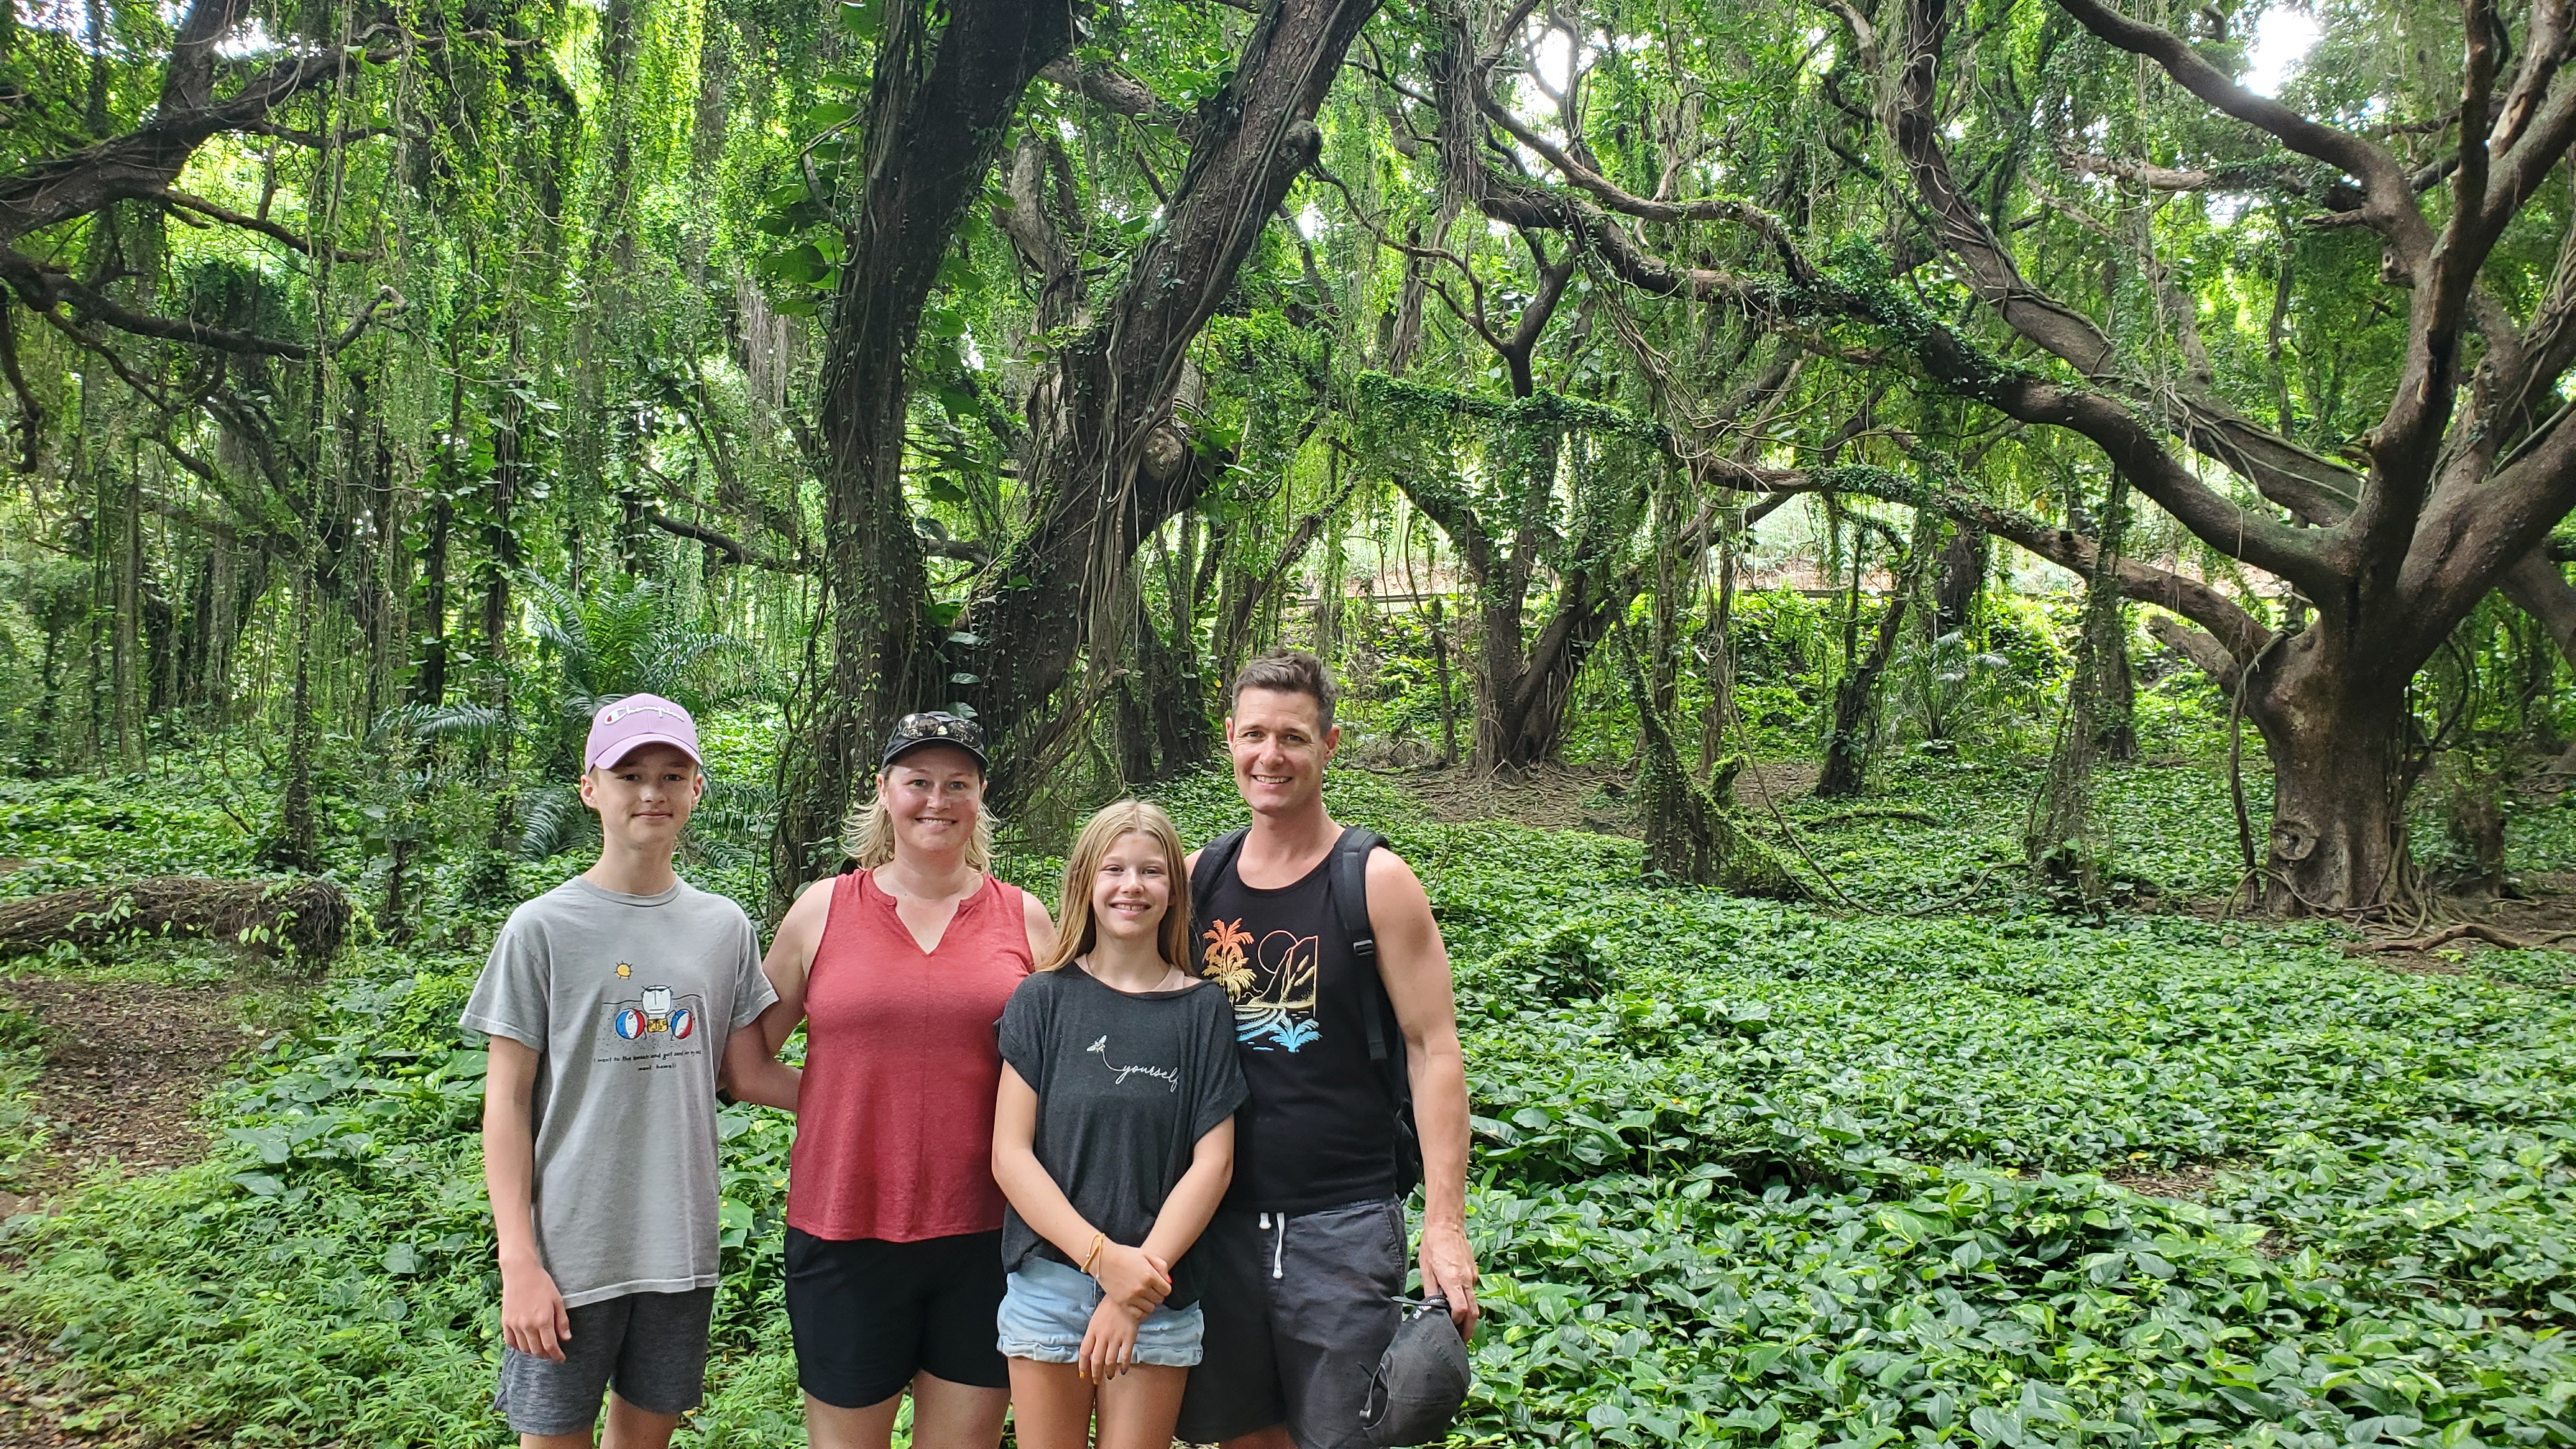 Man, woman and teenagers, family of mother, father, son, daughter, standing in lush green forest with trees and foliage